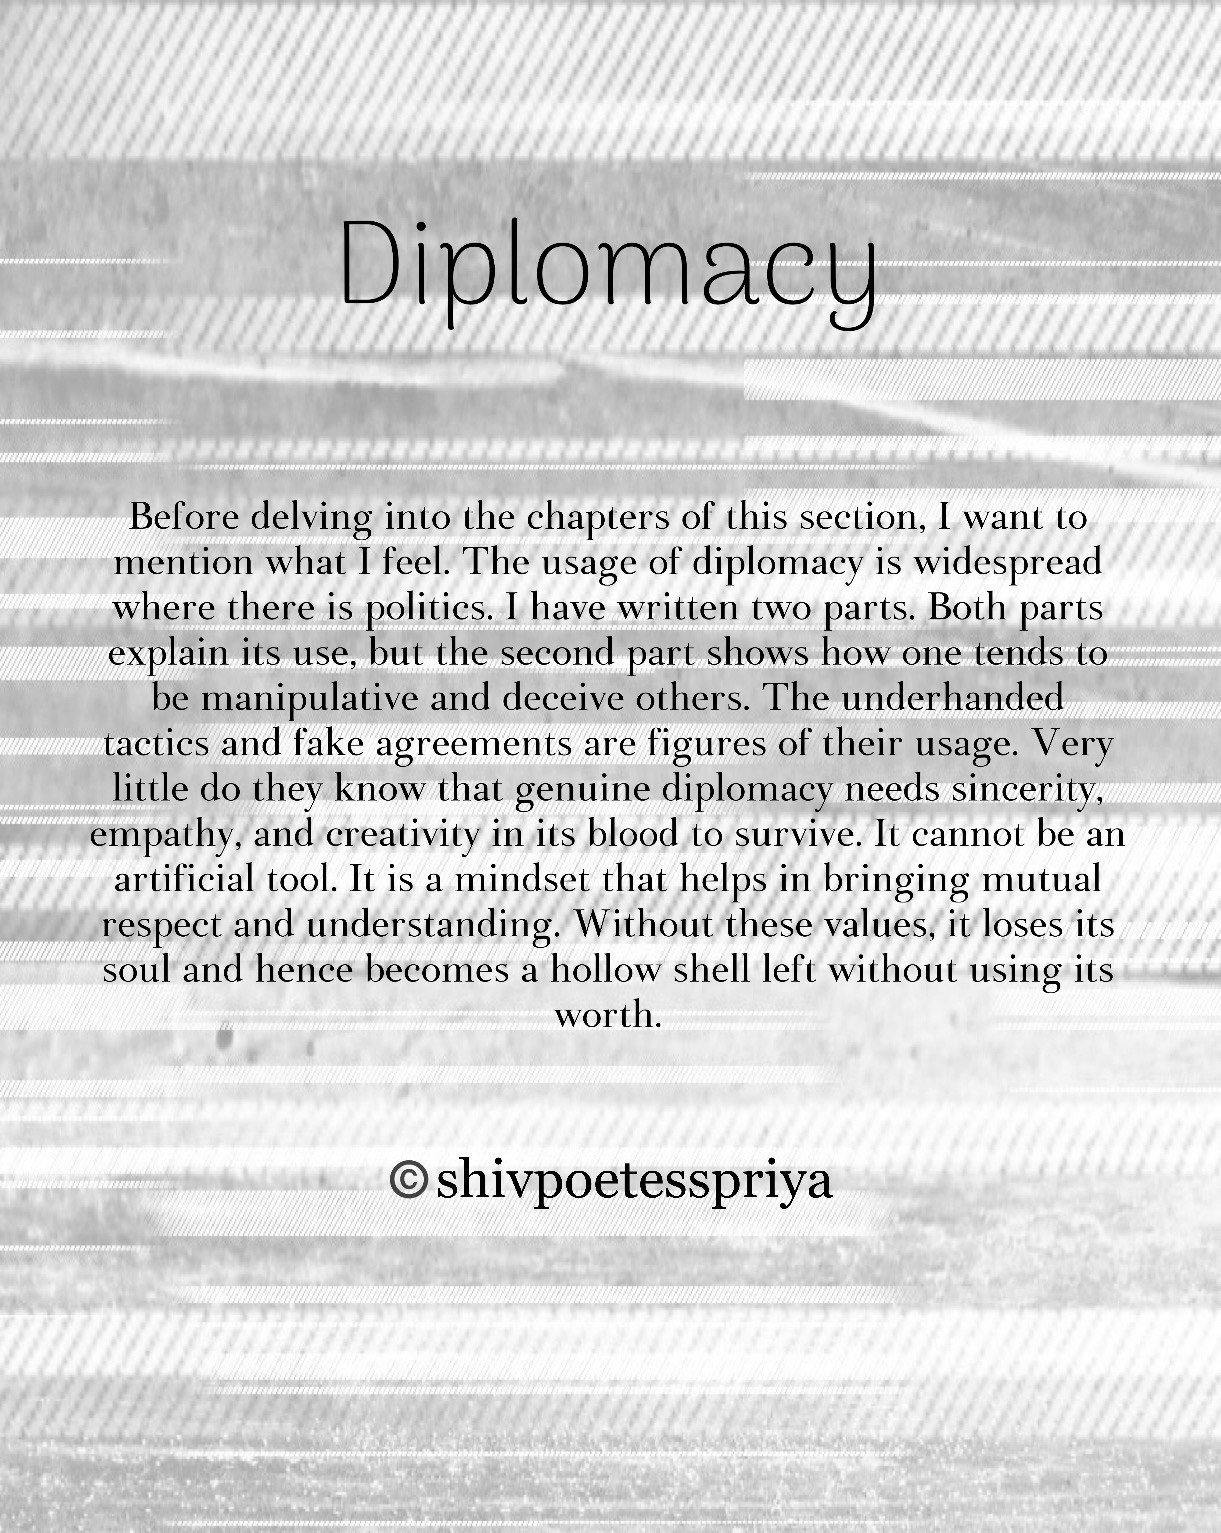 Diplomacy (Introductory Part)